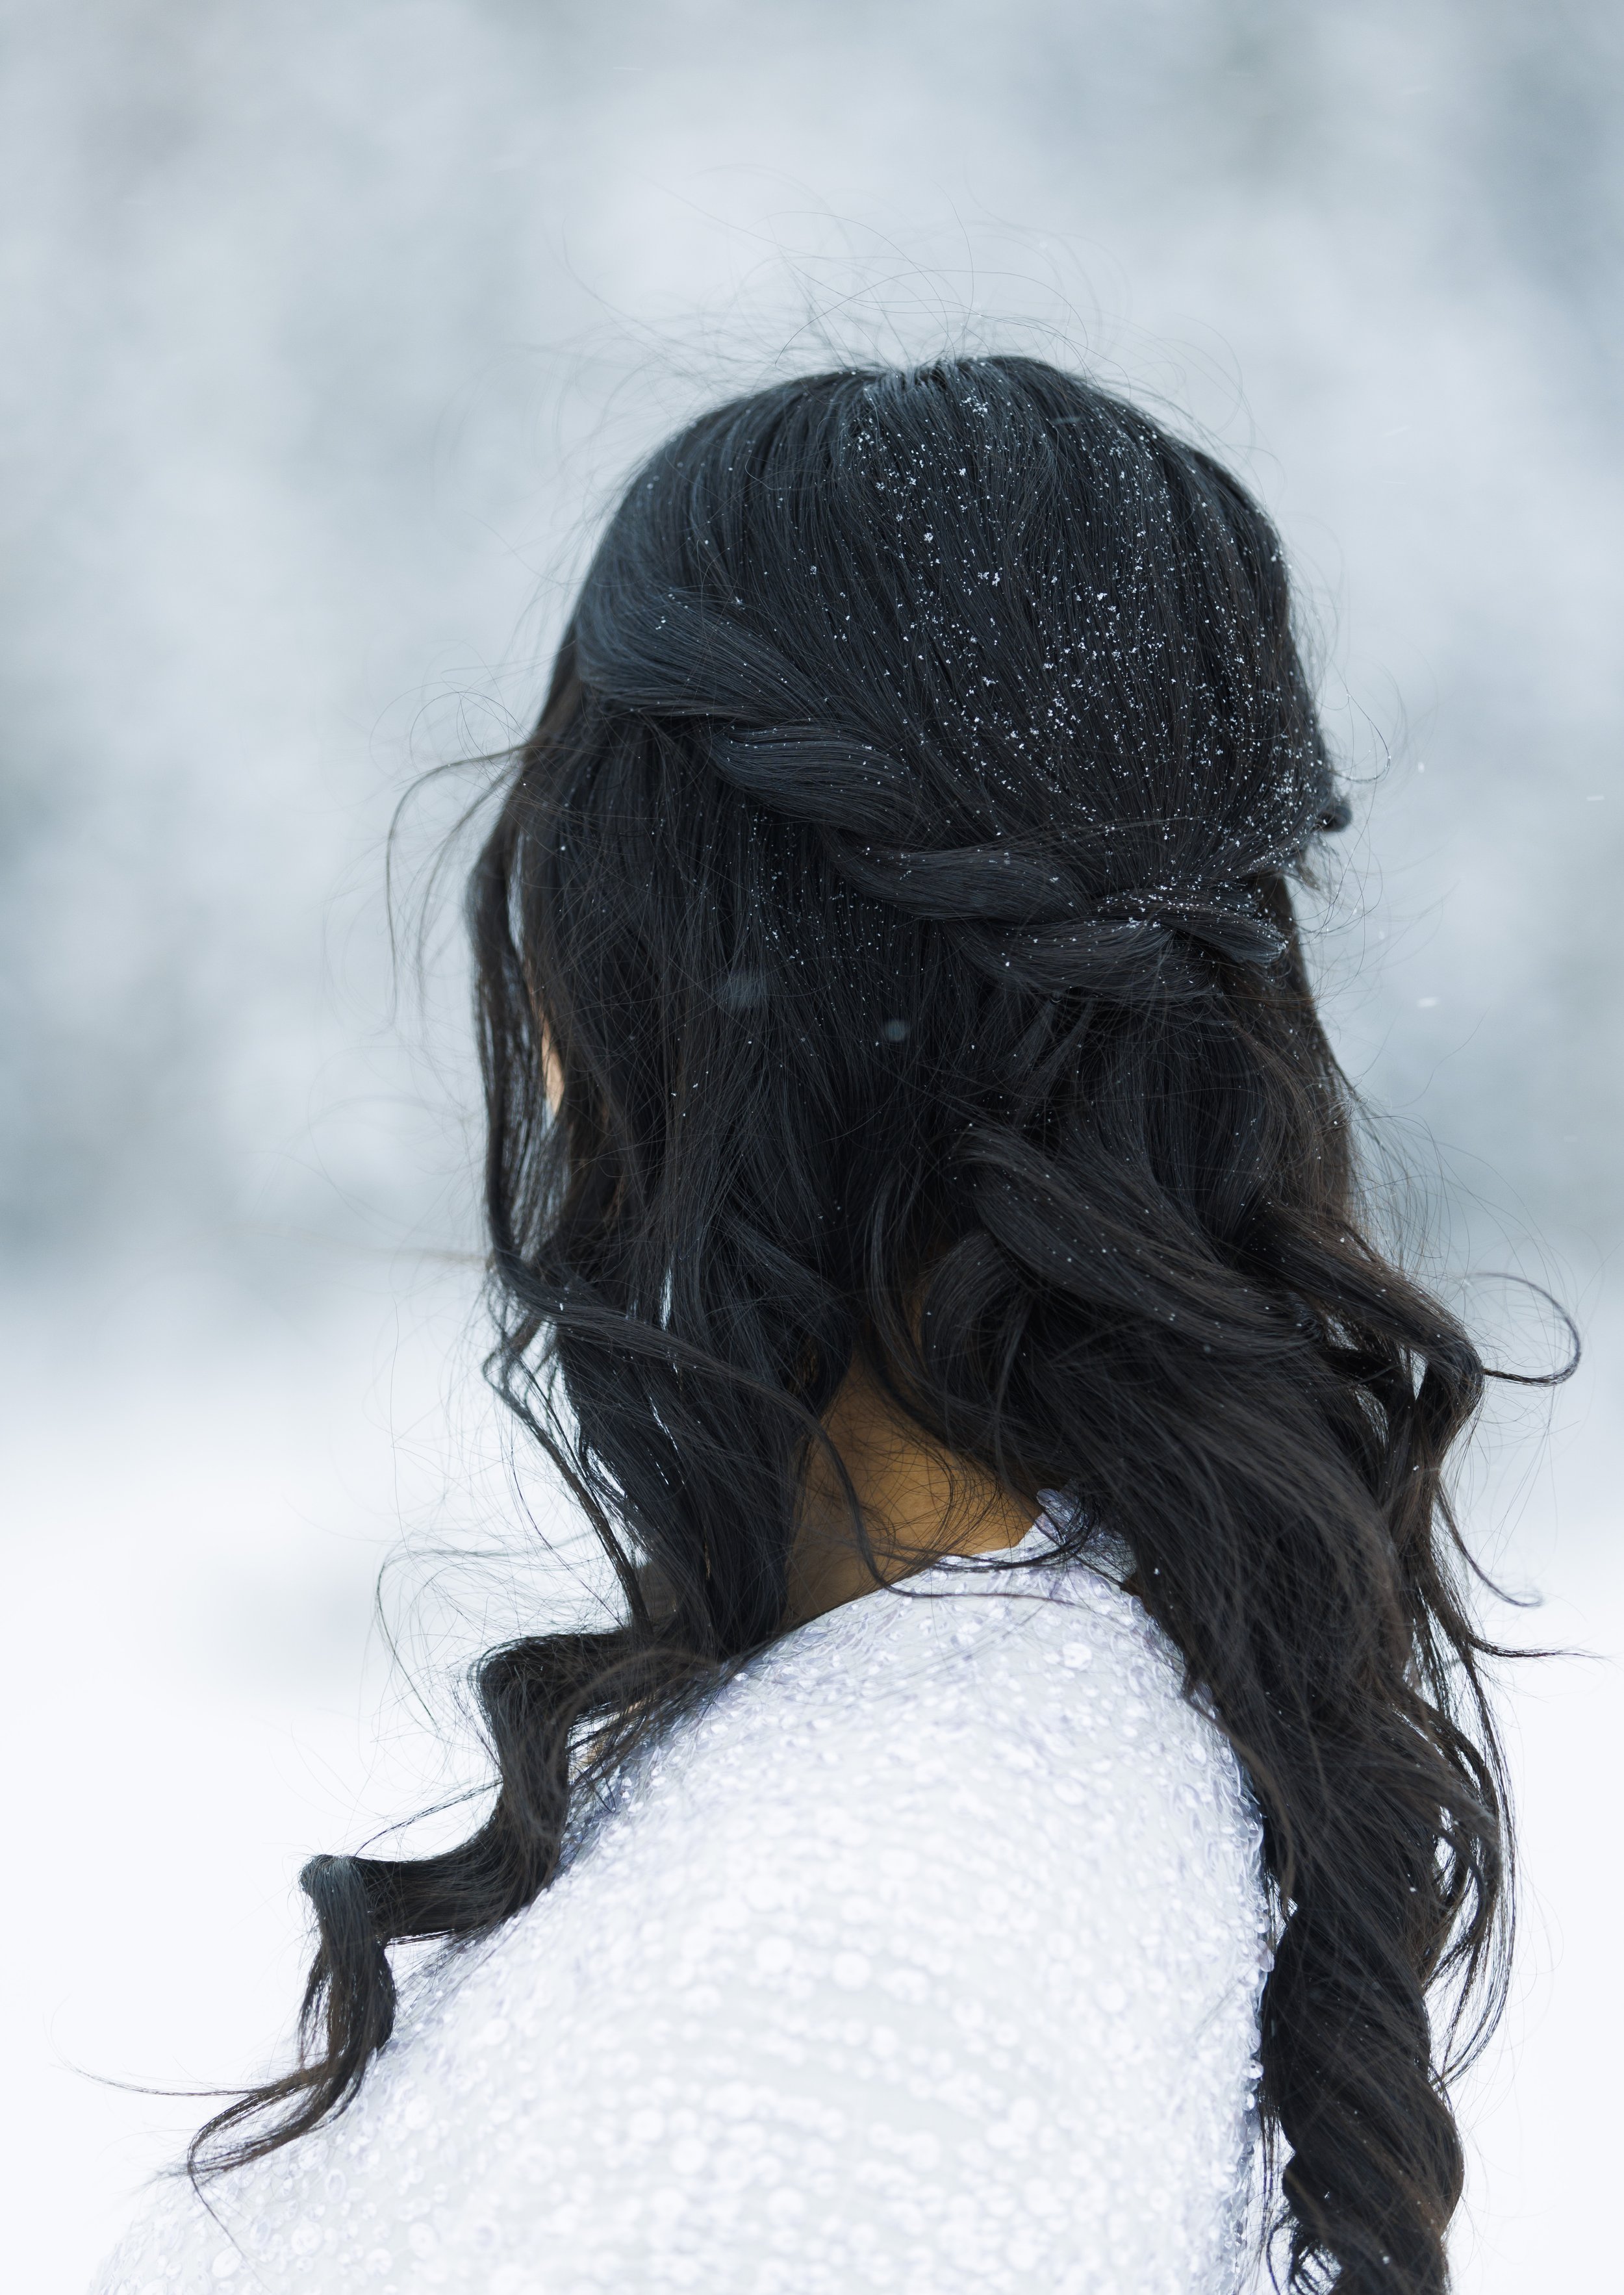  Bridal hairstyle with twisty braid and half-up hair-do by Savanna Richardson Photography. bridal hairstyles #SavannaRichardsonPhotography #SavannaRichardsonBridals #WinterBridals #WinterWedding #TibbleForkBridals #UtahBridals #MountainBridals 